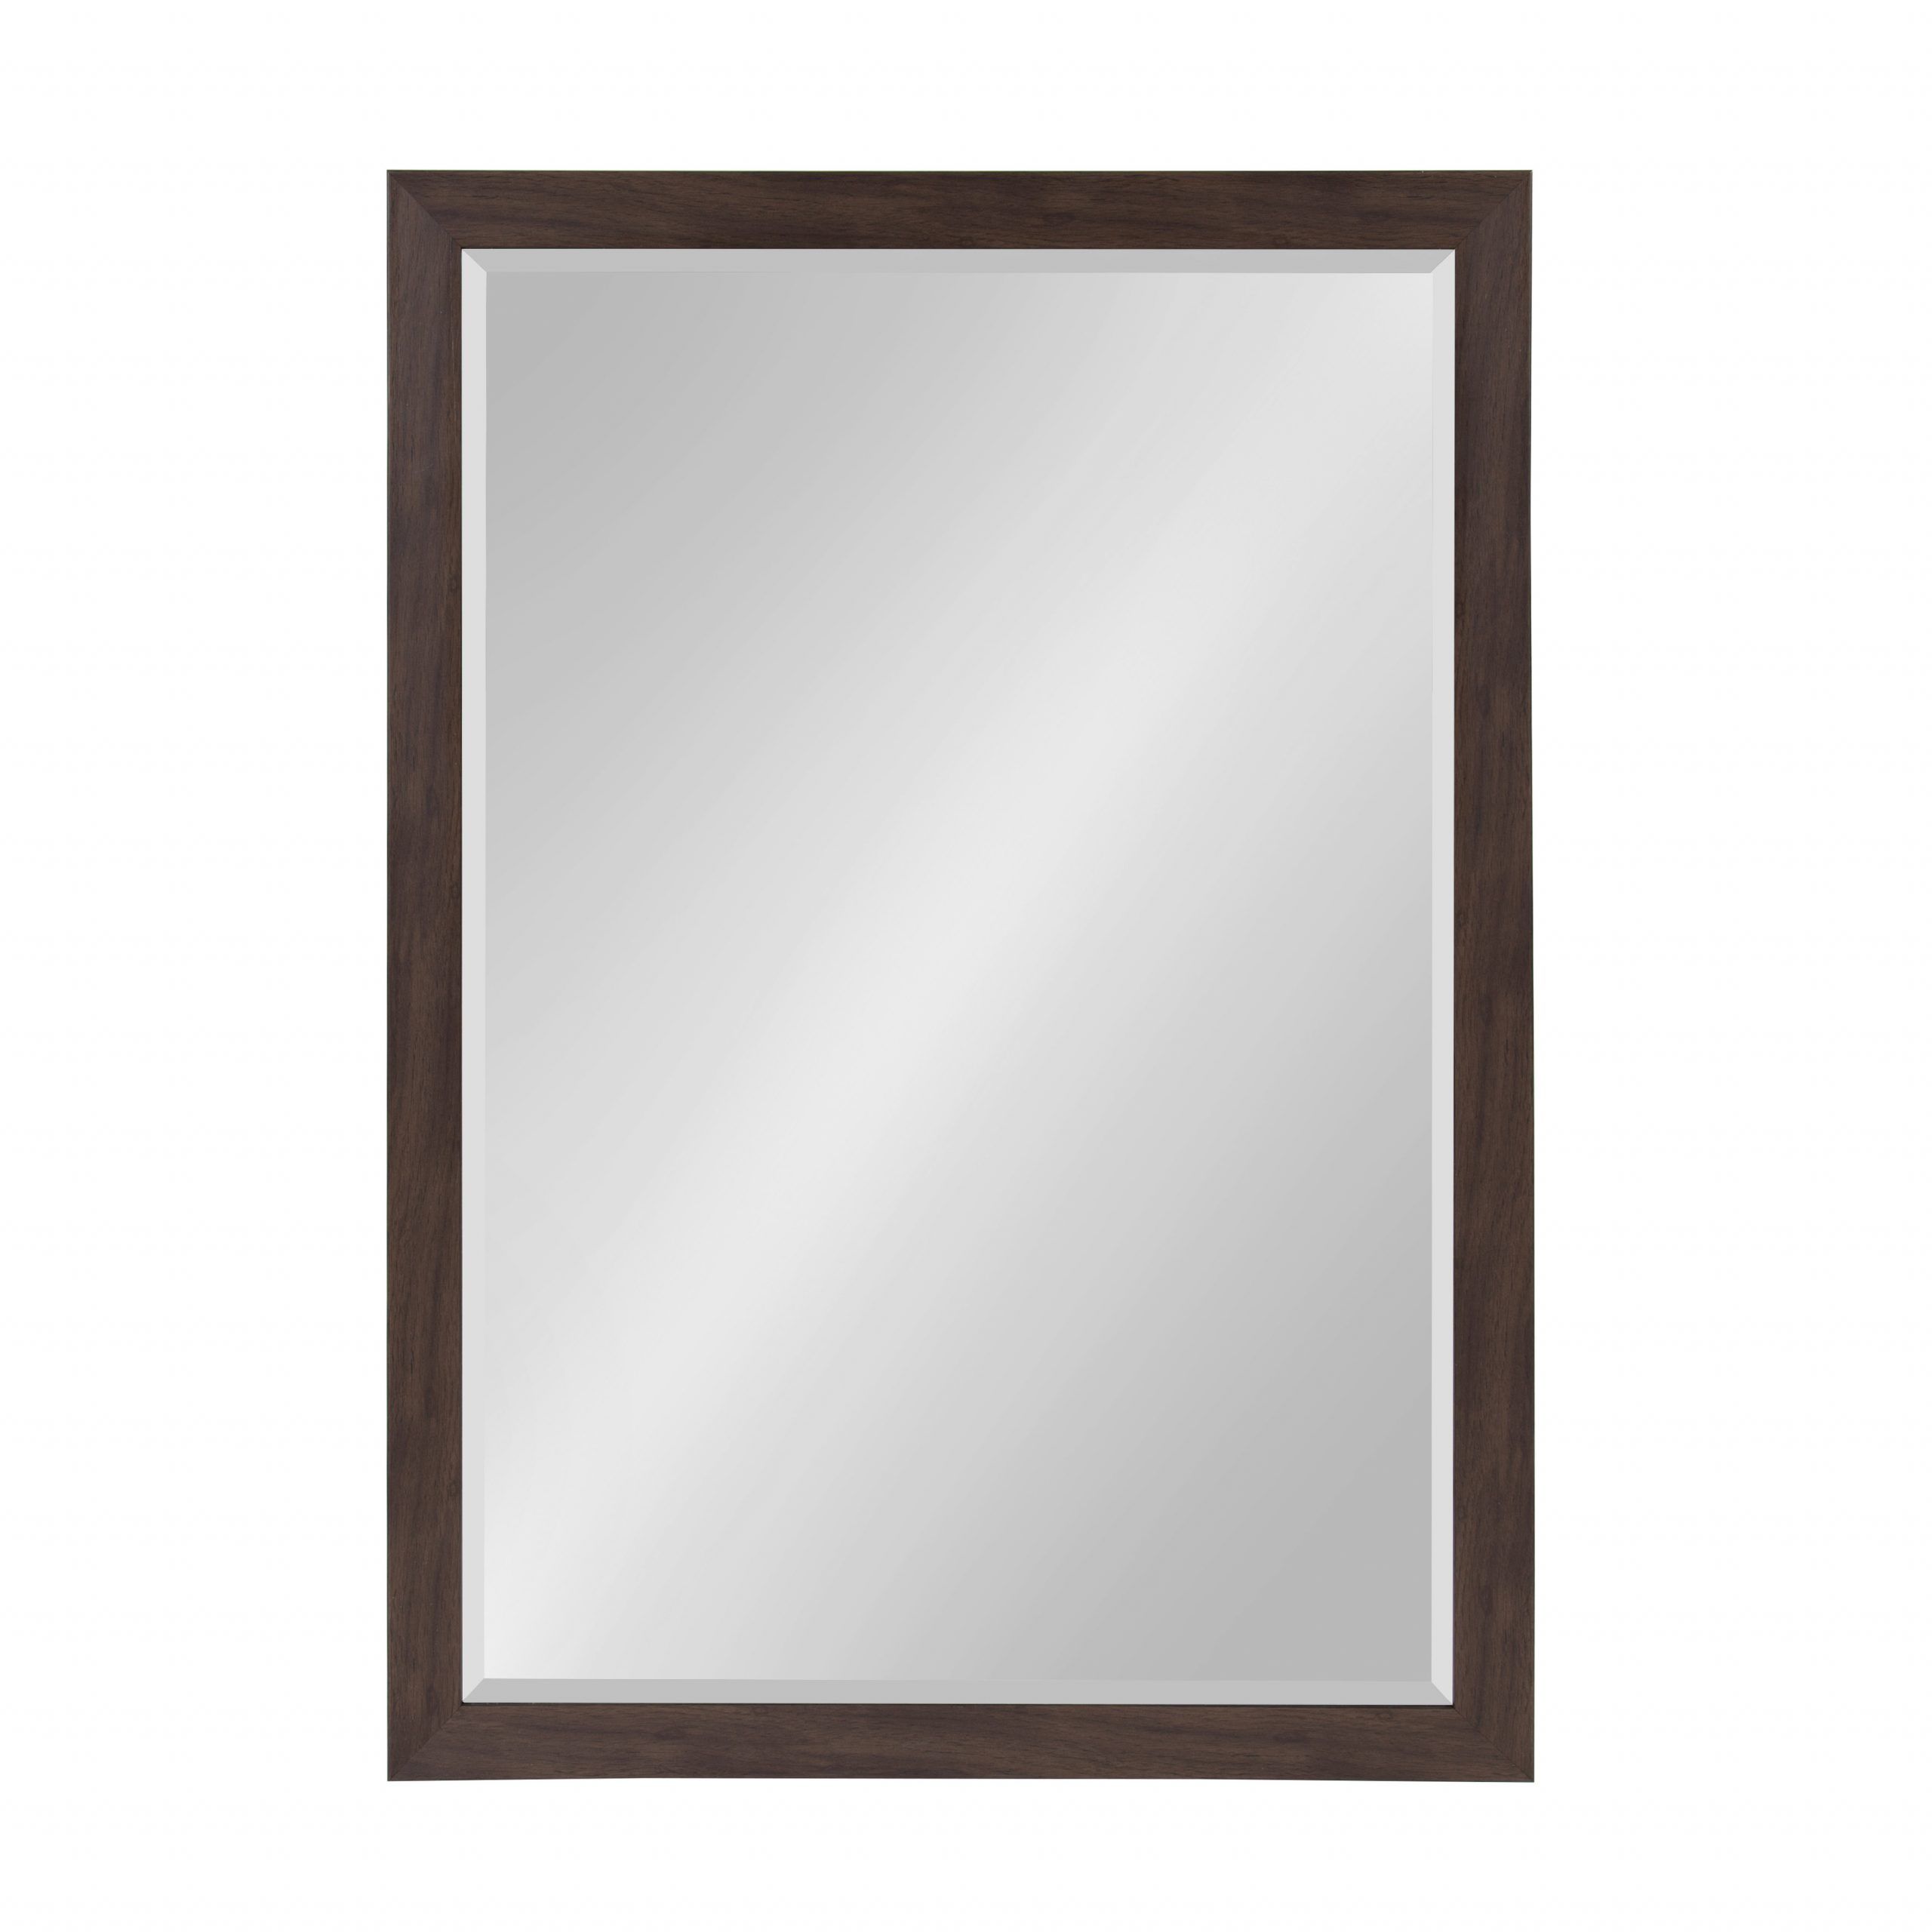 Designovation – Beatrice Framed Decorative Rectangle Wall Mirror, 27 X With Regard To Rectangular Chevron Edge Wall Mirrors (View 1 of 15)